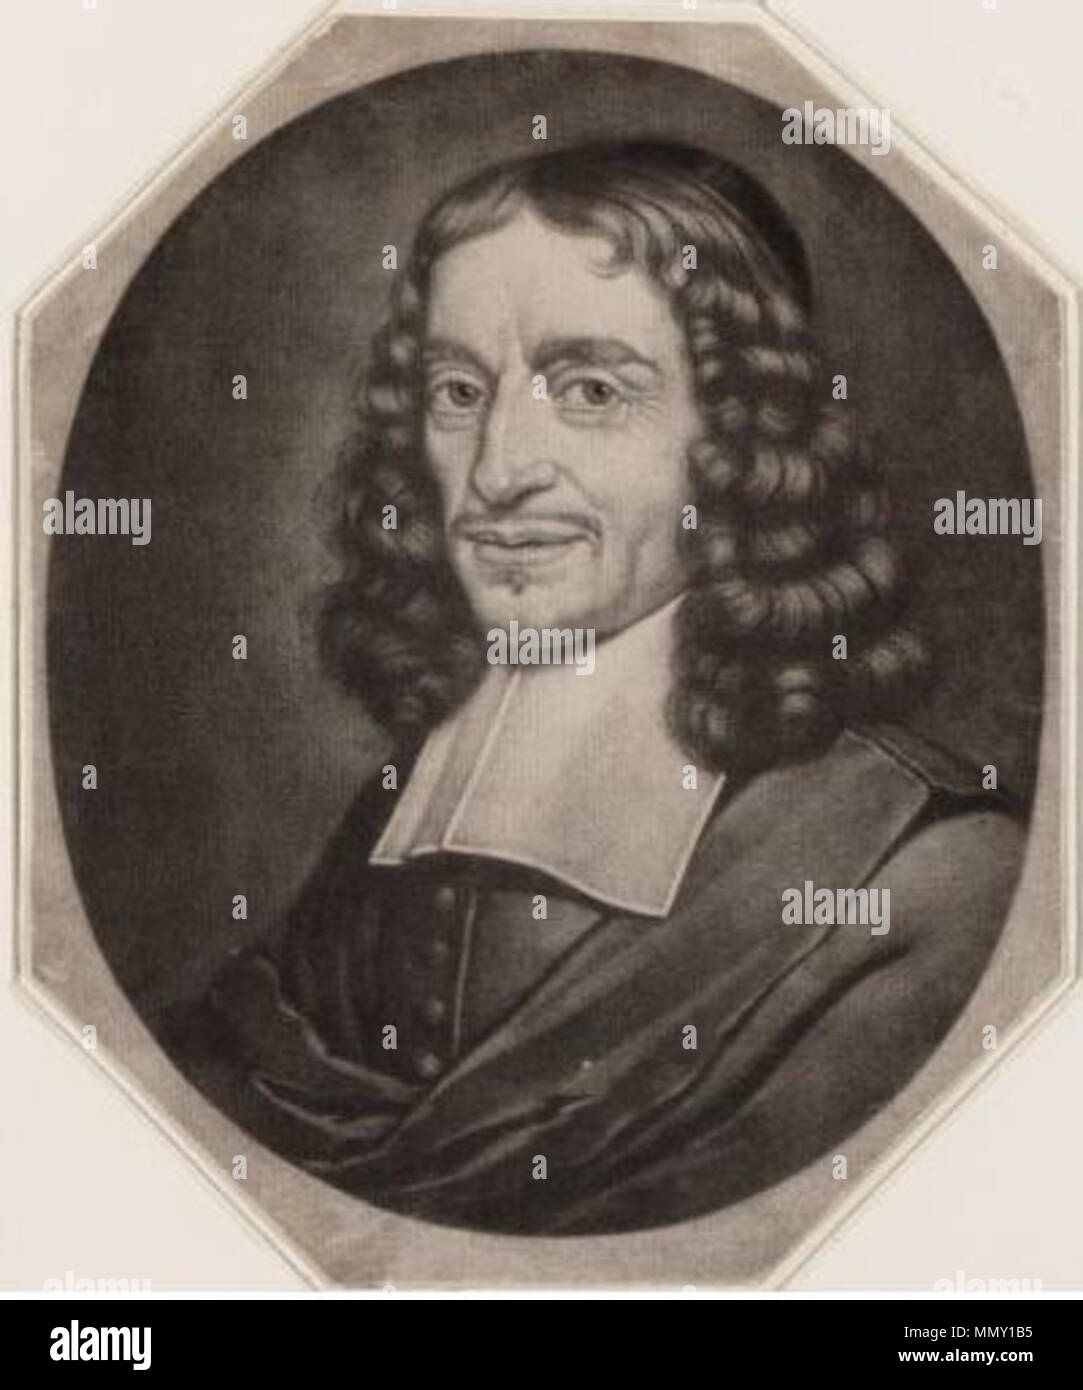 . Gerard Brandt, Dutch historian from Amsterdam (25-07-1626 / 12-10-1685 ).  . 1683. engraving:   Peter Schenk the Elder  (1660–1718)     Alternative names Petrus Schenck (I), Pieter Schenck (I), Petrus Schenk (I)  Description Dutch printmaker and publisher  Date of birth/death 26 December 1660 (baptised) 1711  Location of birth/death Elberfeld Leipzig  Work location Amsterdam, Rotterdam  Authority control  : Q78163 VIAF:?87245200 ISNI:?0000 0001 1682 407X ULAN:?500008827 LCCN:?n96109832 NLA:?36409973 WorldCat    painting:   After Michiel van Musscher  (1643–1705)     Description Dutch painter Stock Photo